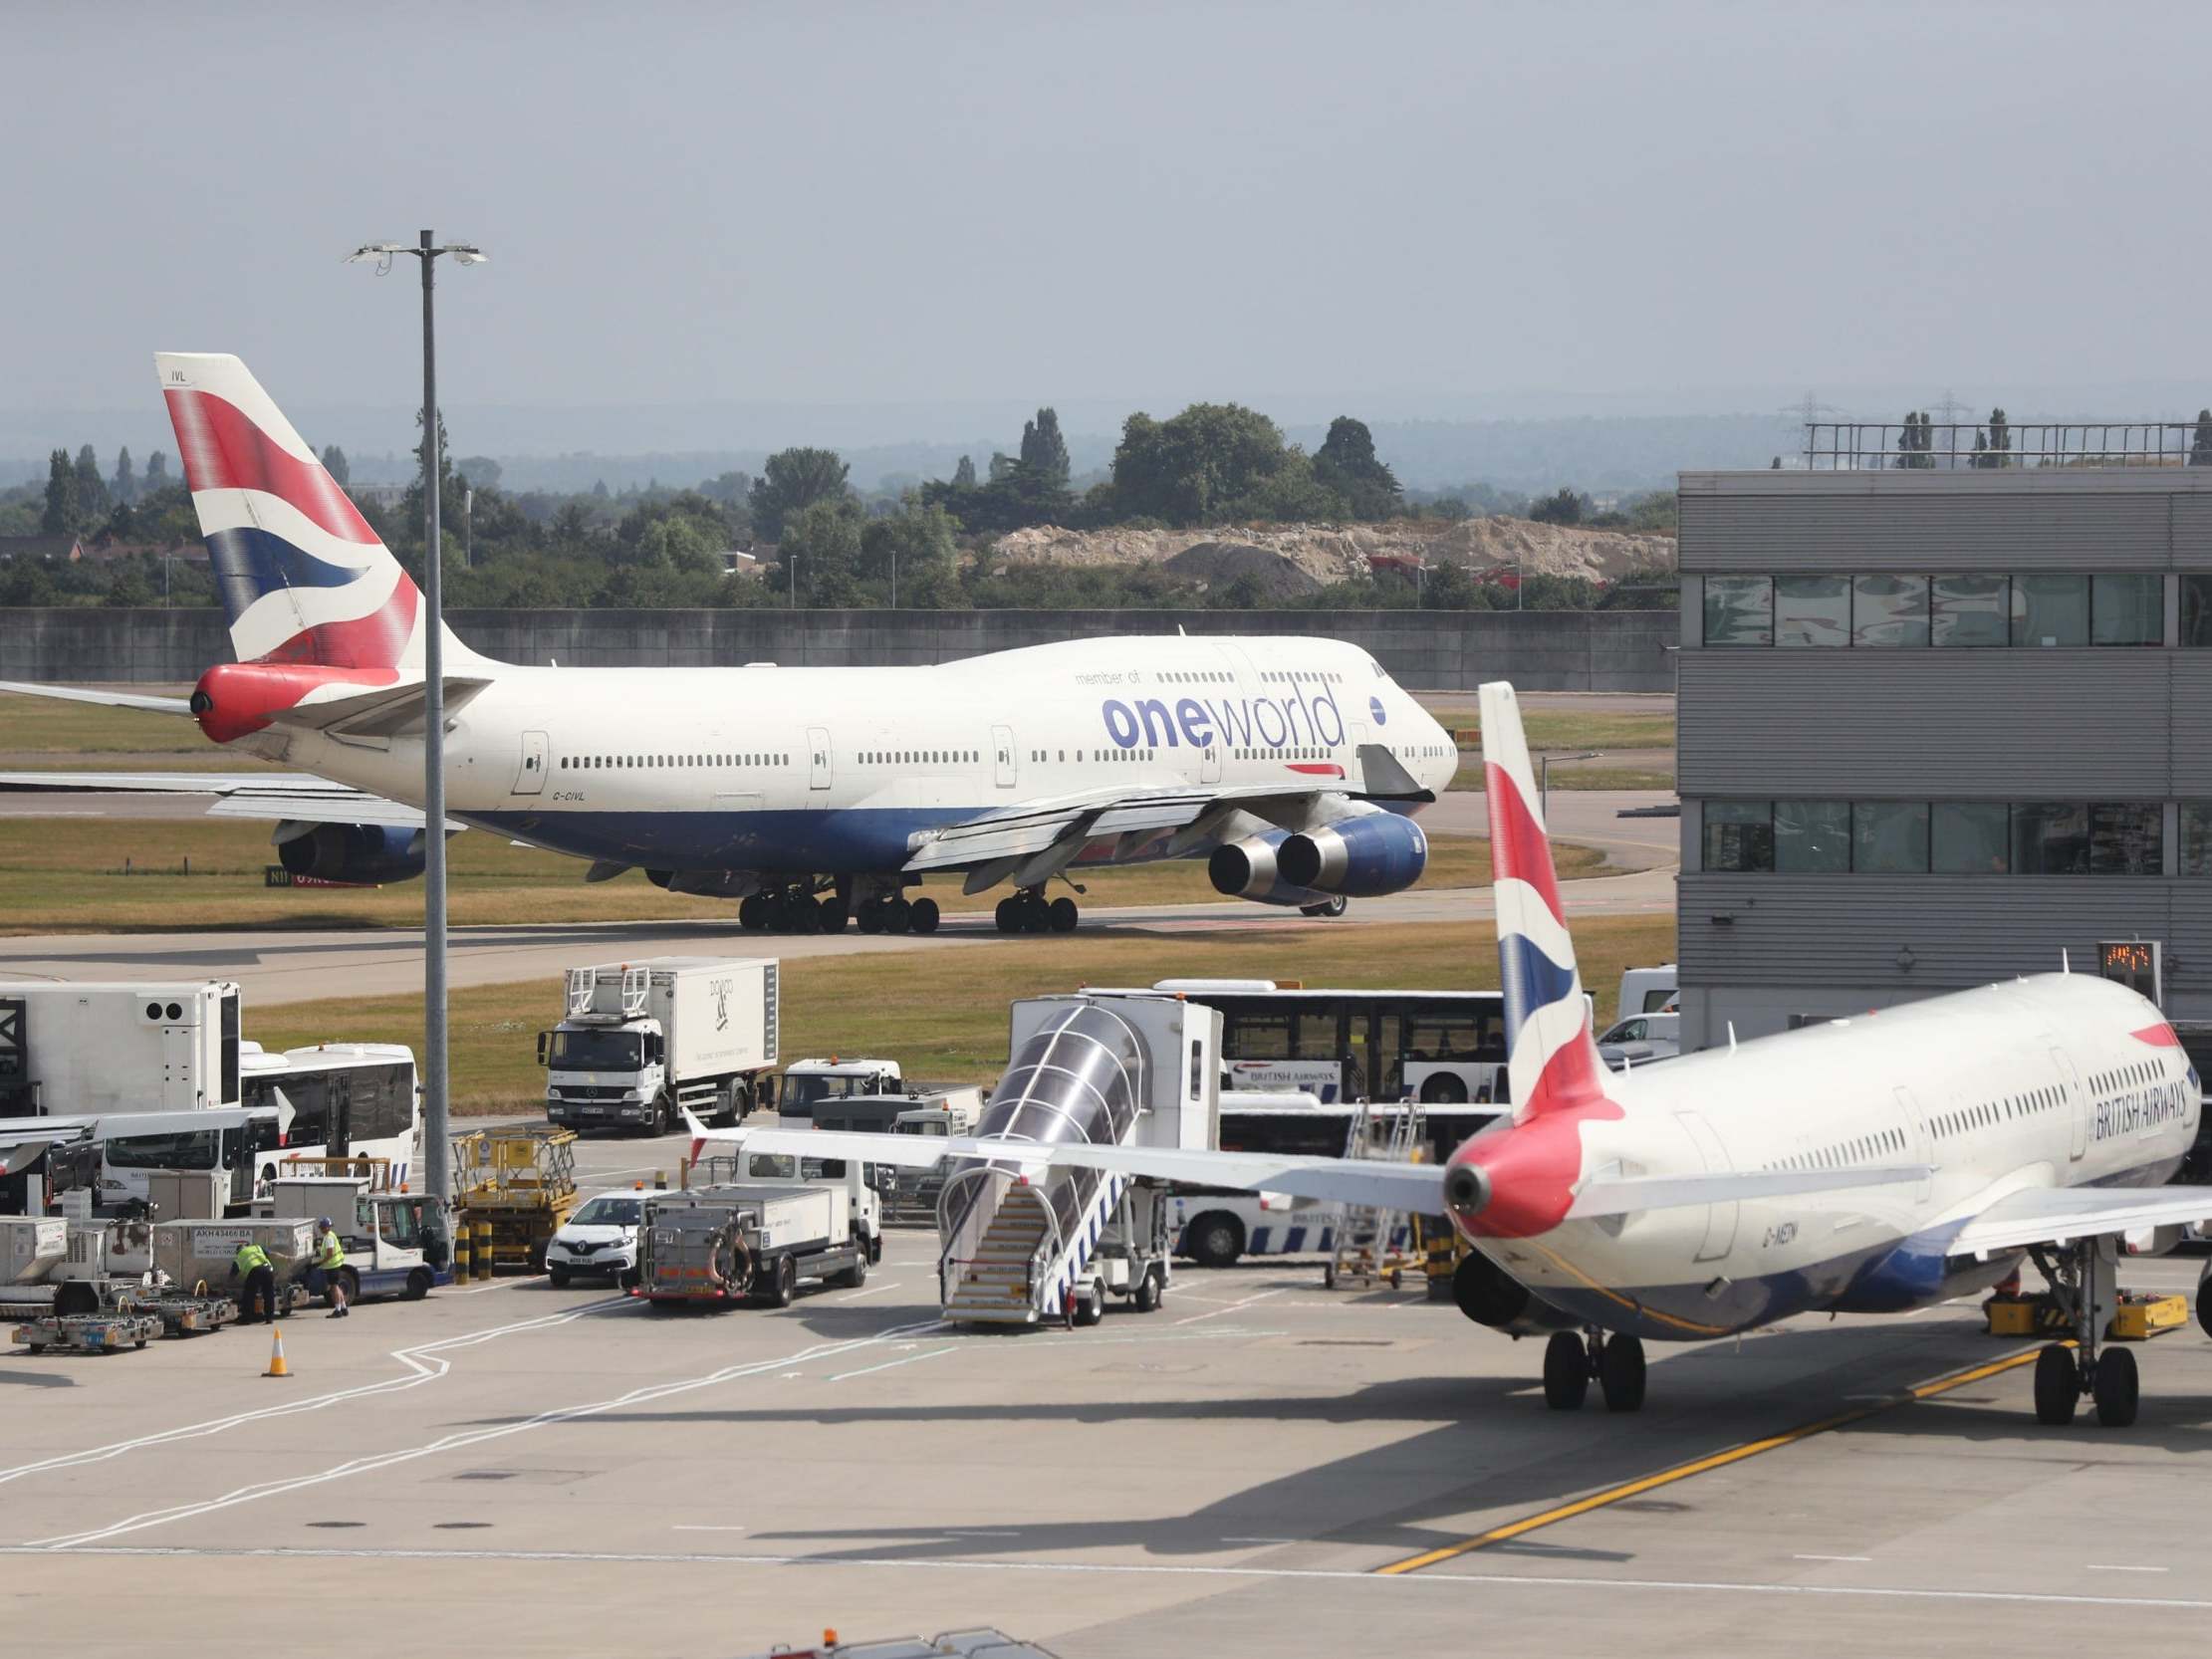 Planes on the runway at Heathrow airport